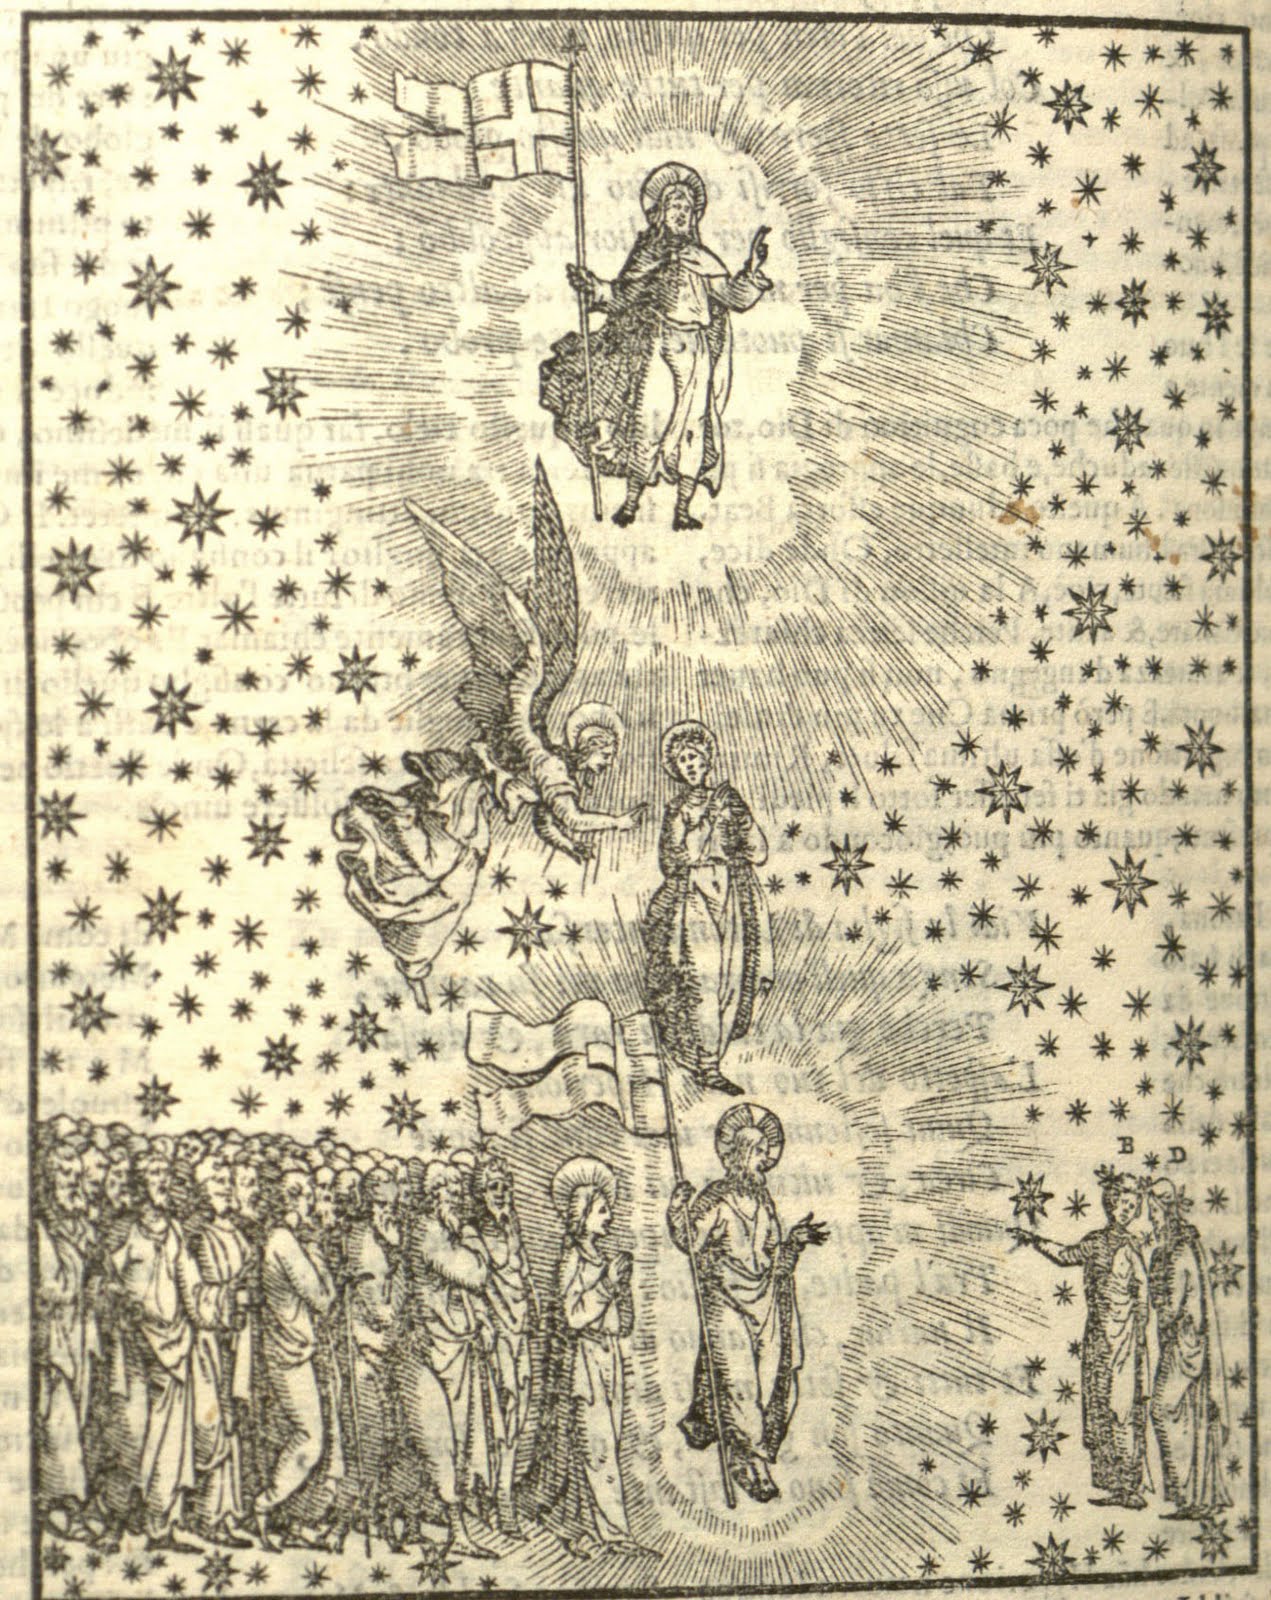 Illustration from Dante's Divine Comedy with people on the ground, angels in the air, and holy figures in the heaven and on the ground.